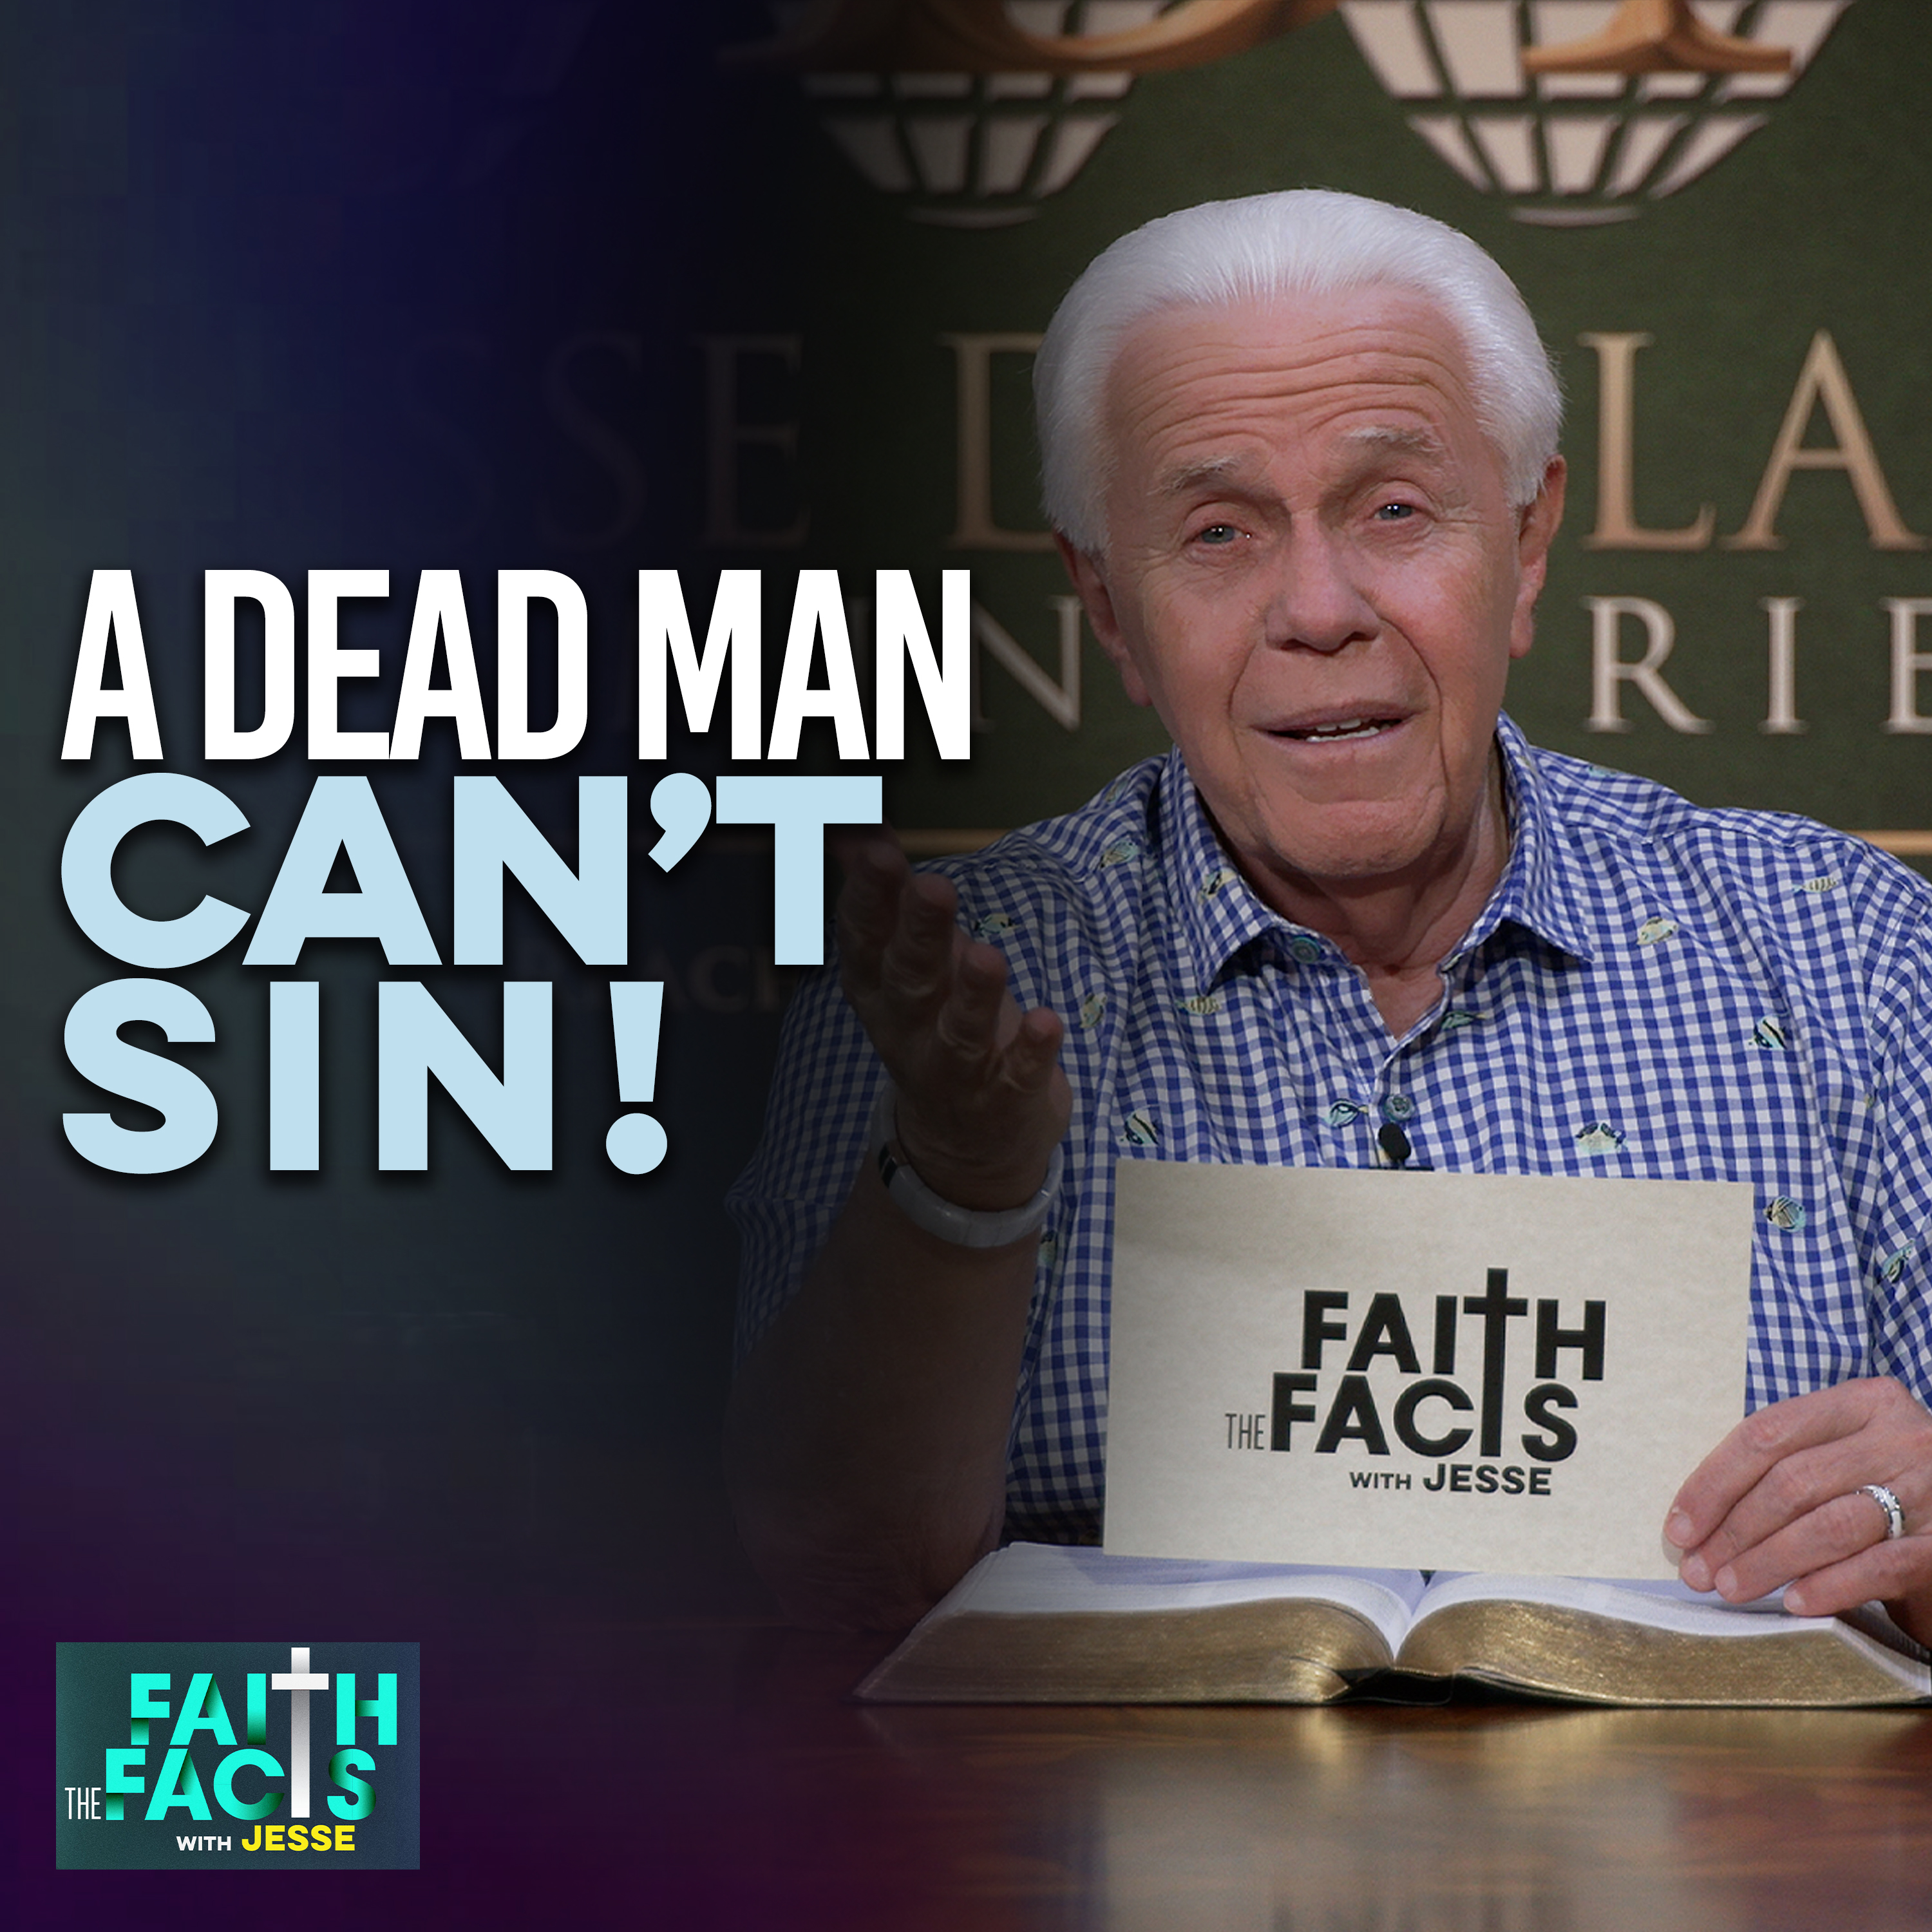 A Dead Man Can’t Sin!